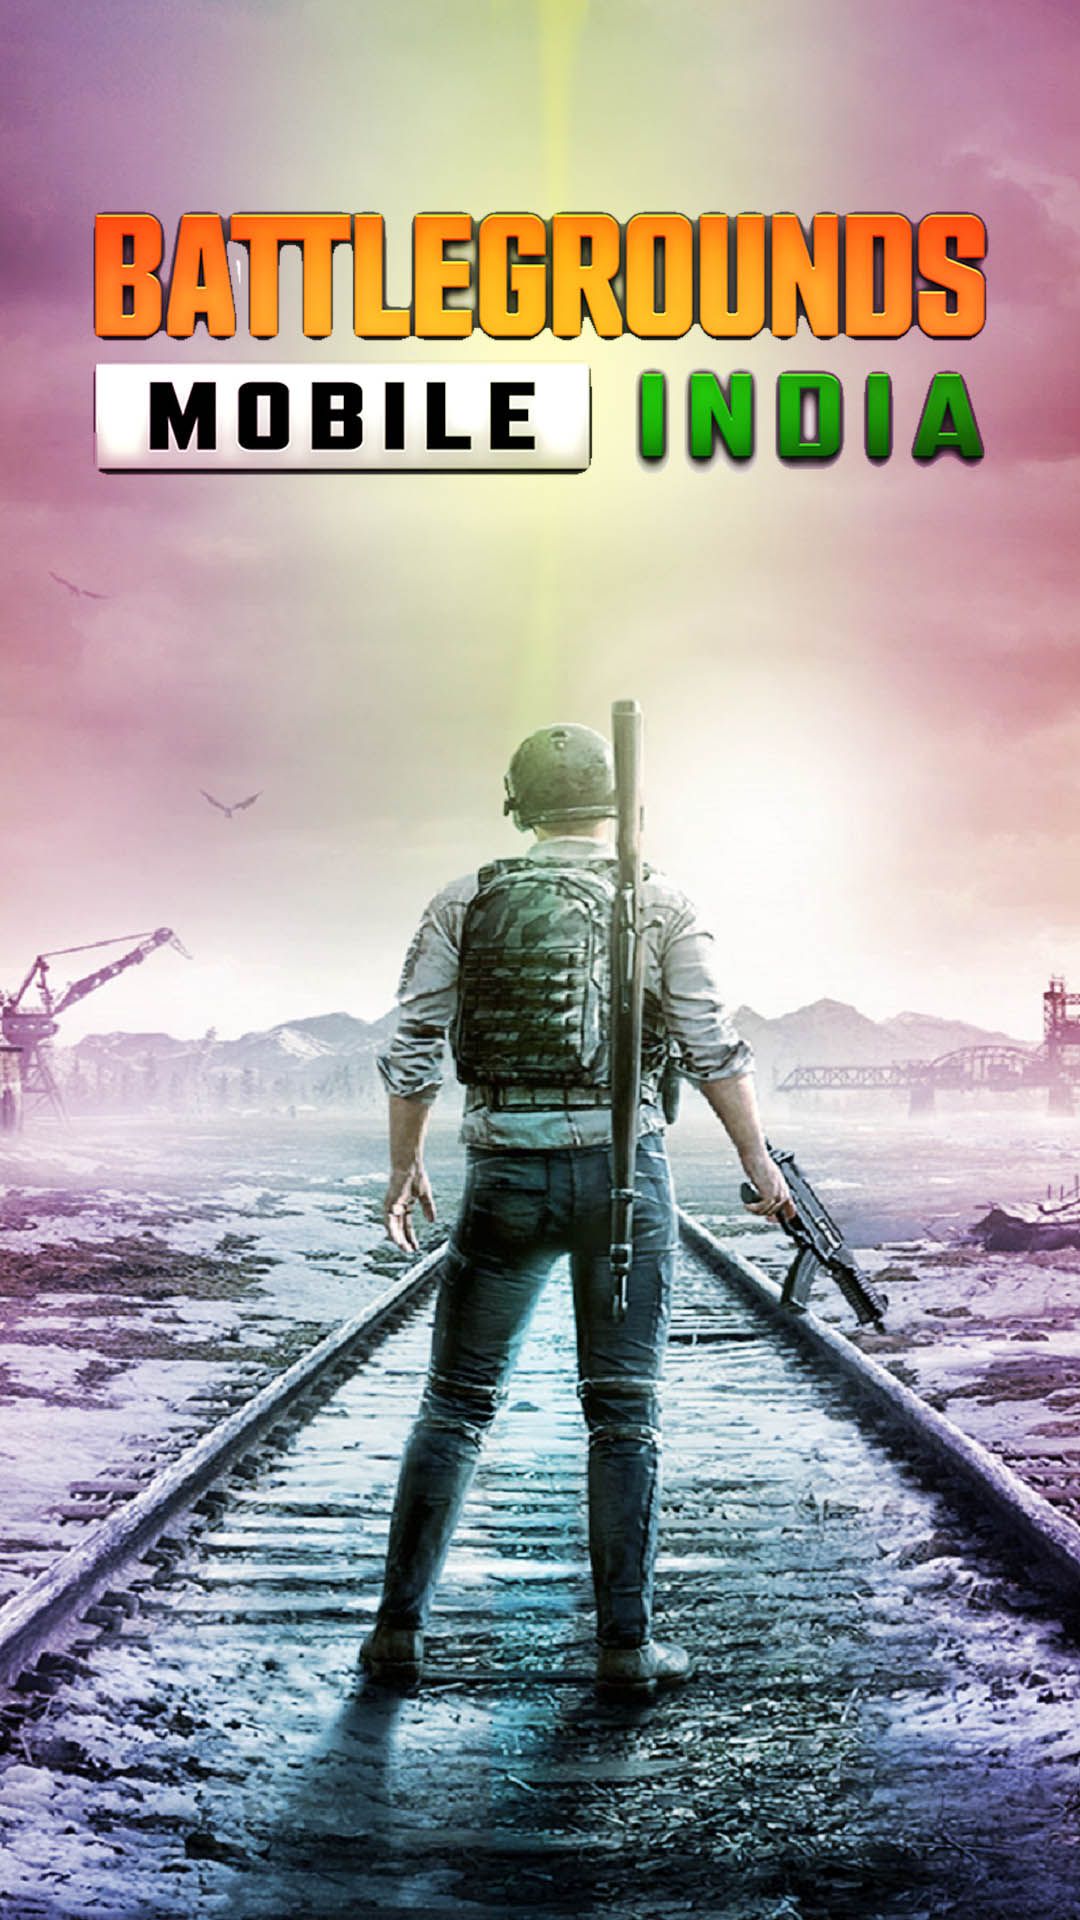 Battlegrounds mobile india hd wallpapers